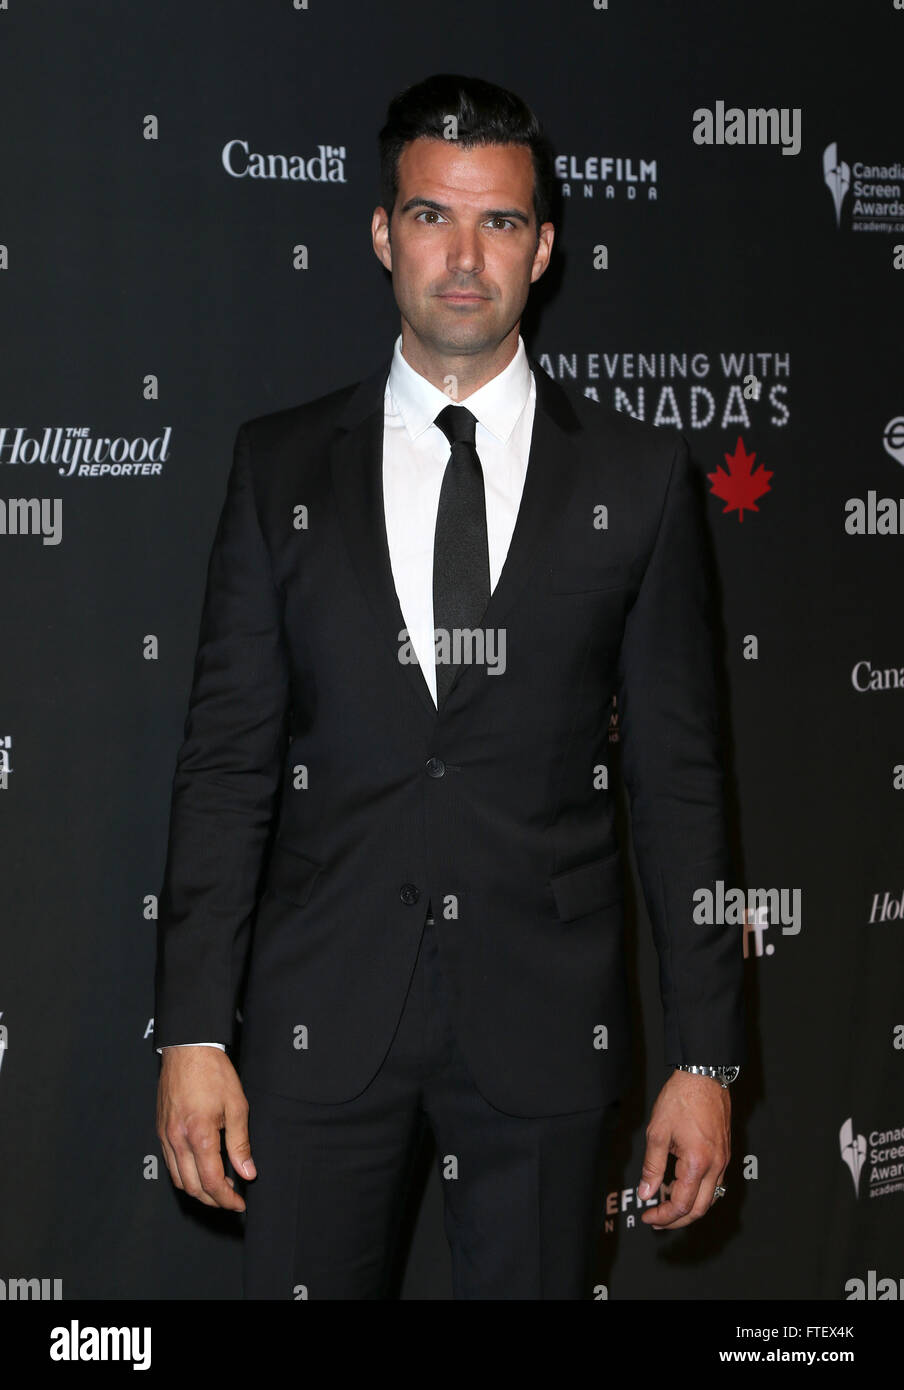 3rd Annual 'An Evening With Canada's Stars' - Arrivals  Featuring: Benjamin Ayres Where: Beverly Hills, California, United States When: 25 Feb 2016 Stock Photo